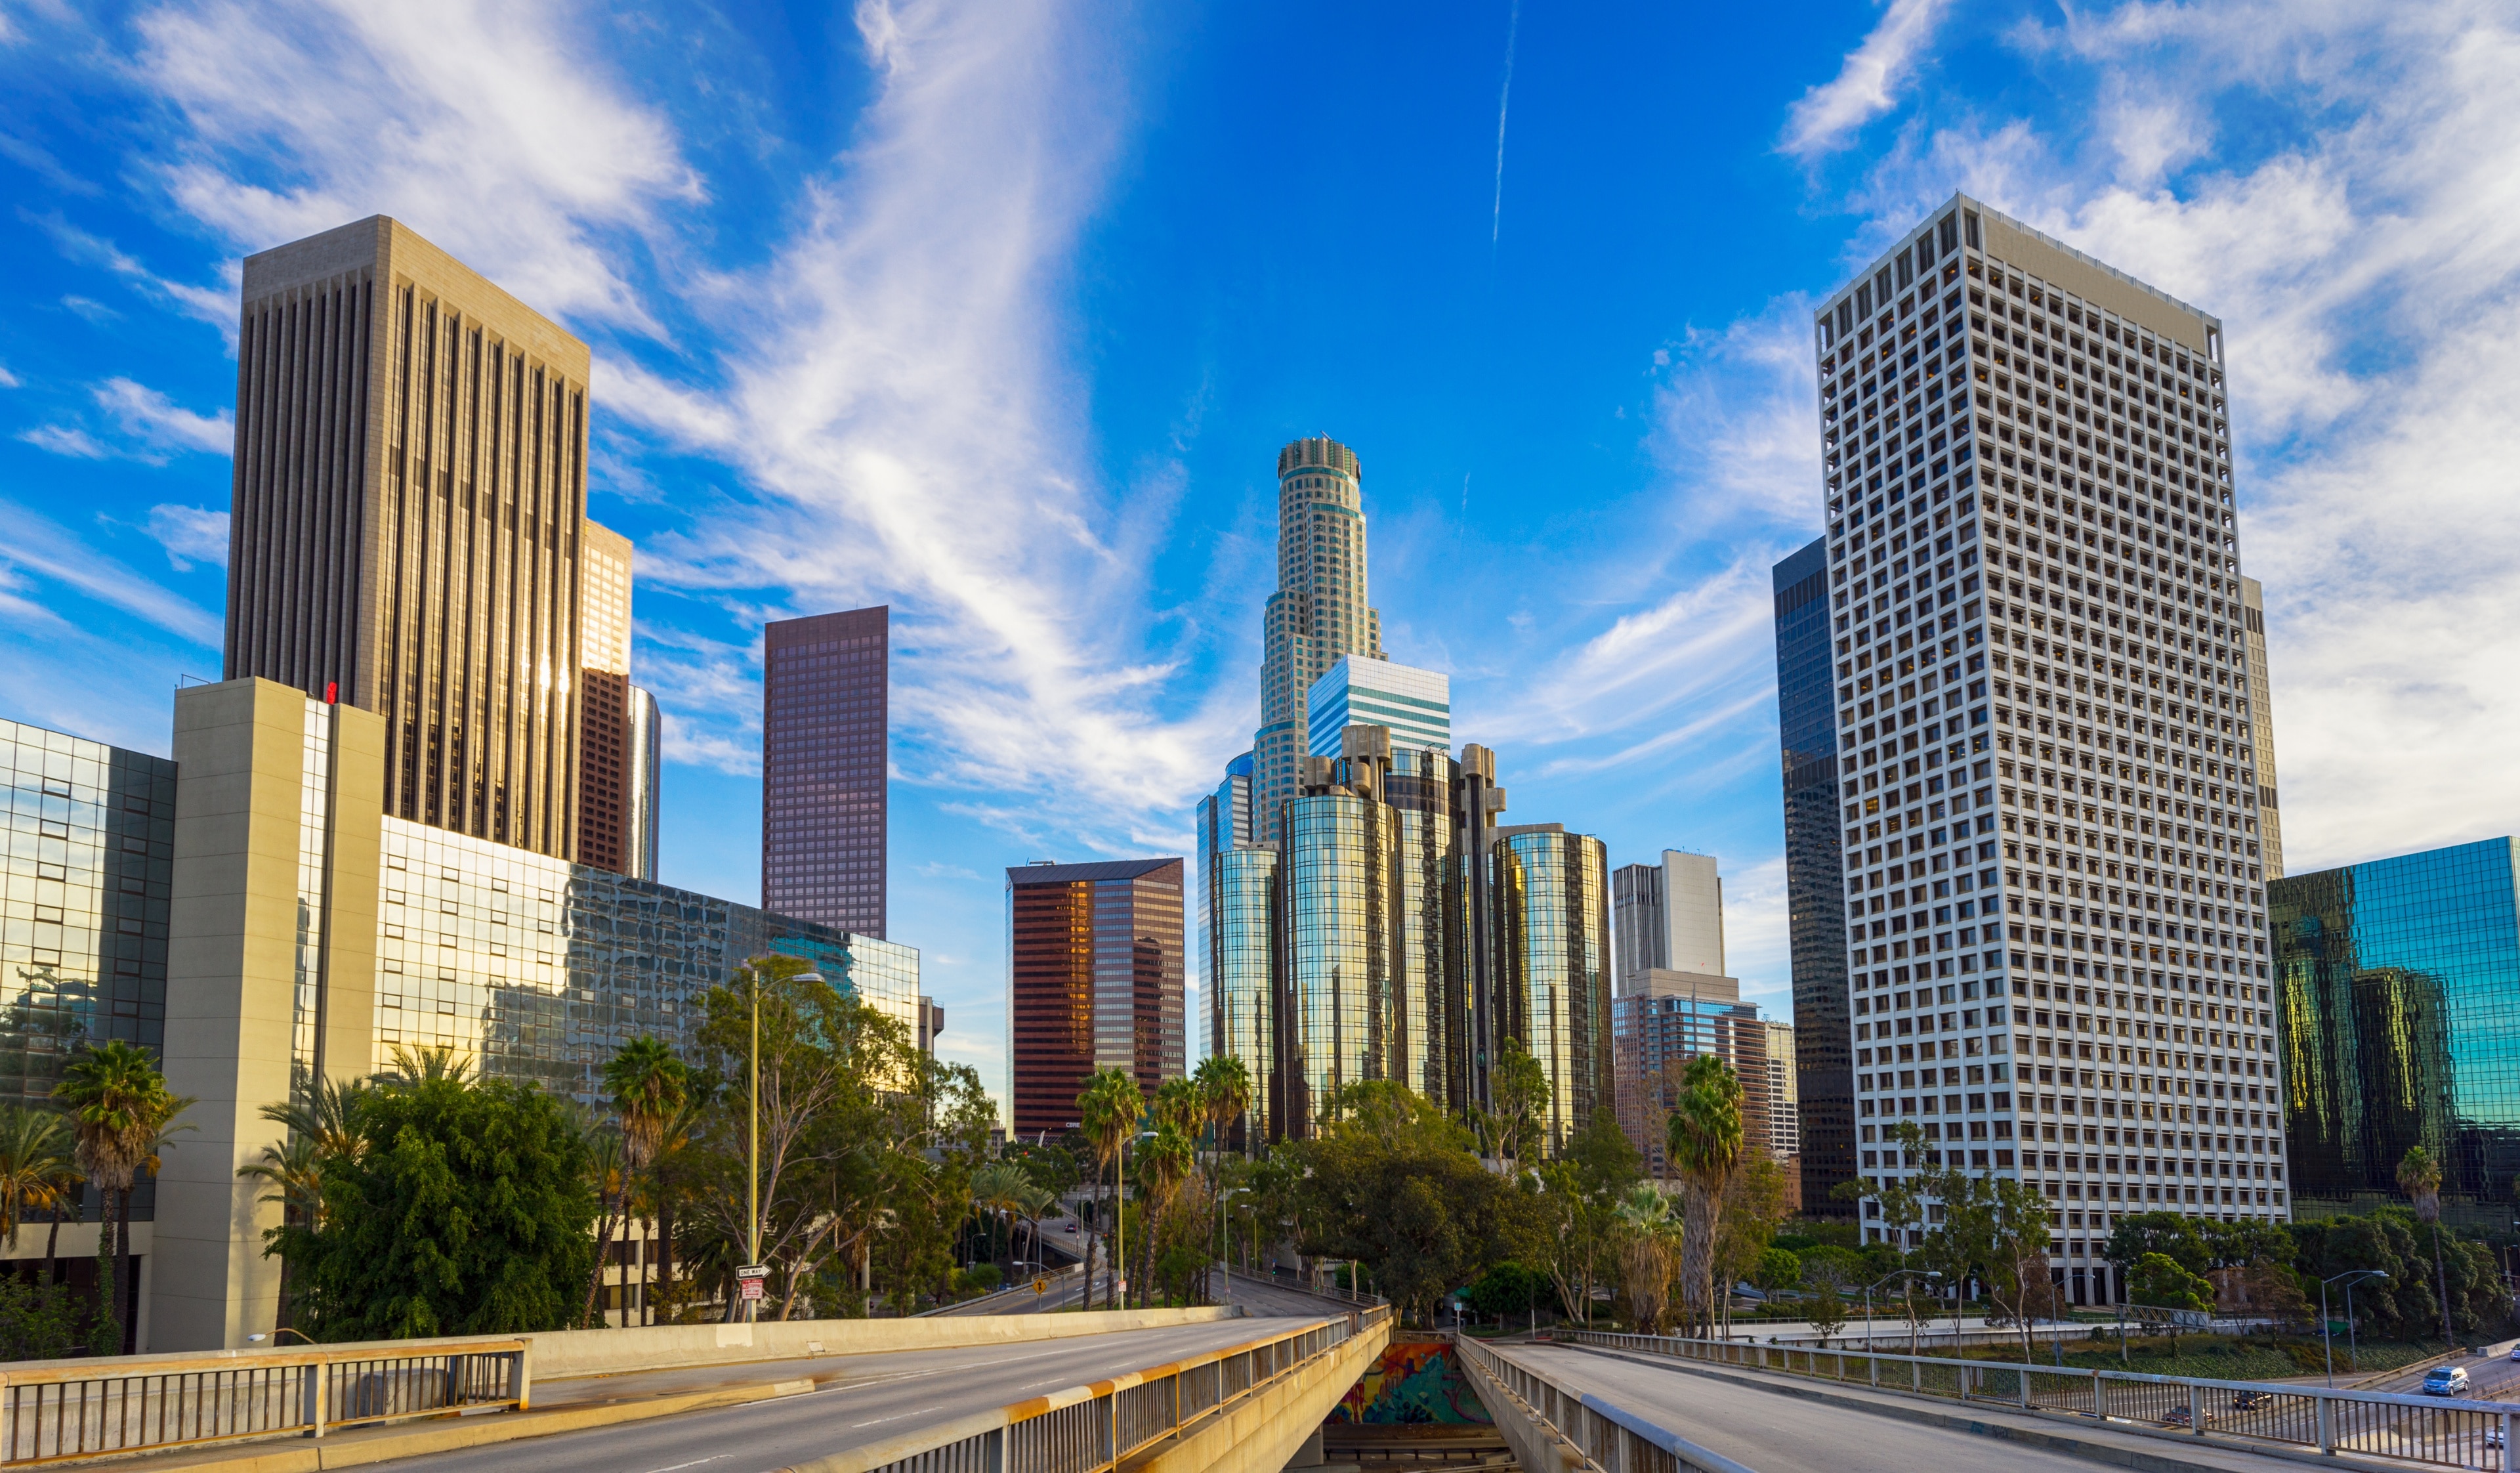 Downtown Los Angeles, Los Angeles, California, United States of America